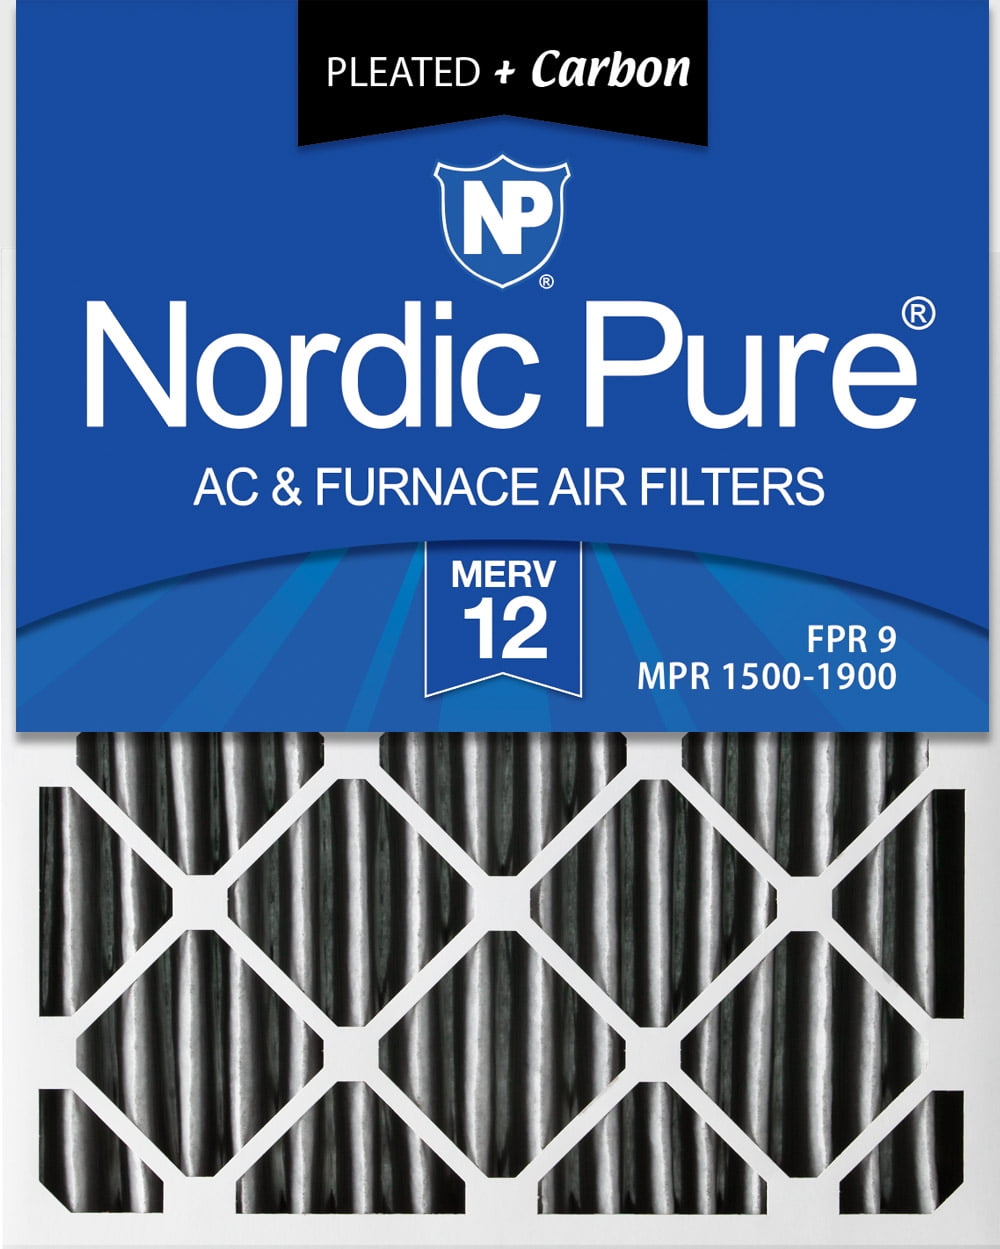 3 Pack Nordic Pure 14x25x2 MERV 13 Plus Carbon Pleated AC Furnace Air Filters